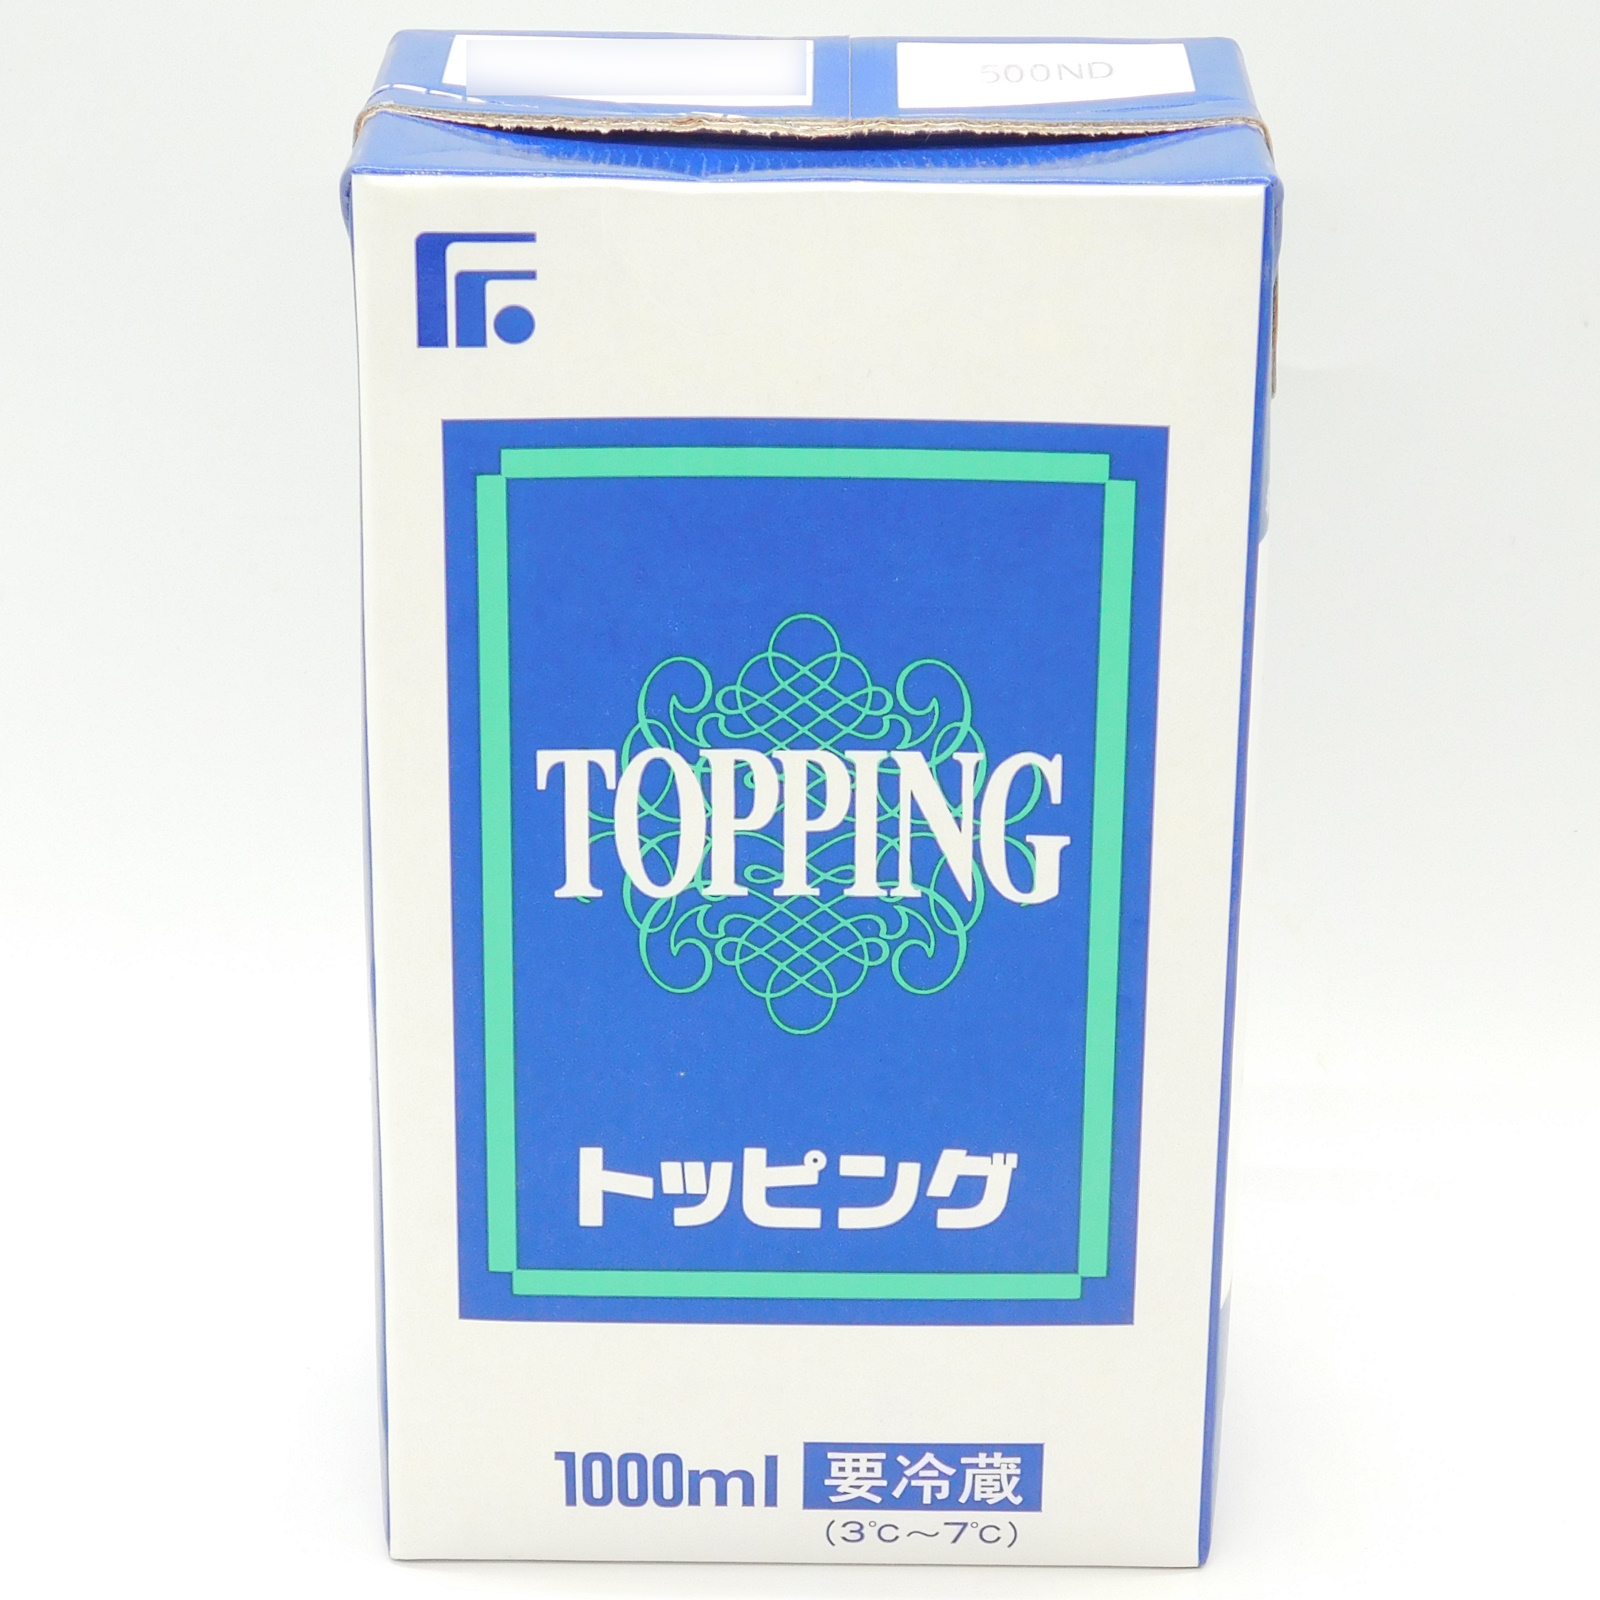  whip cream whip cream topping un- two topping 500ND 1000ml